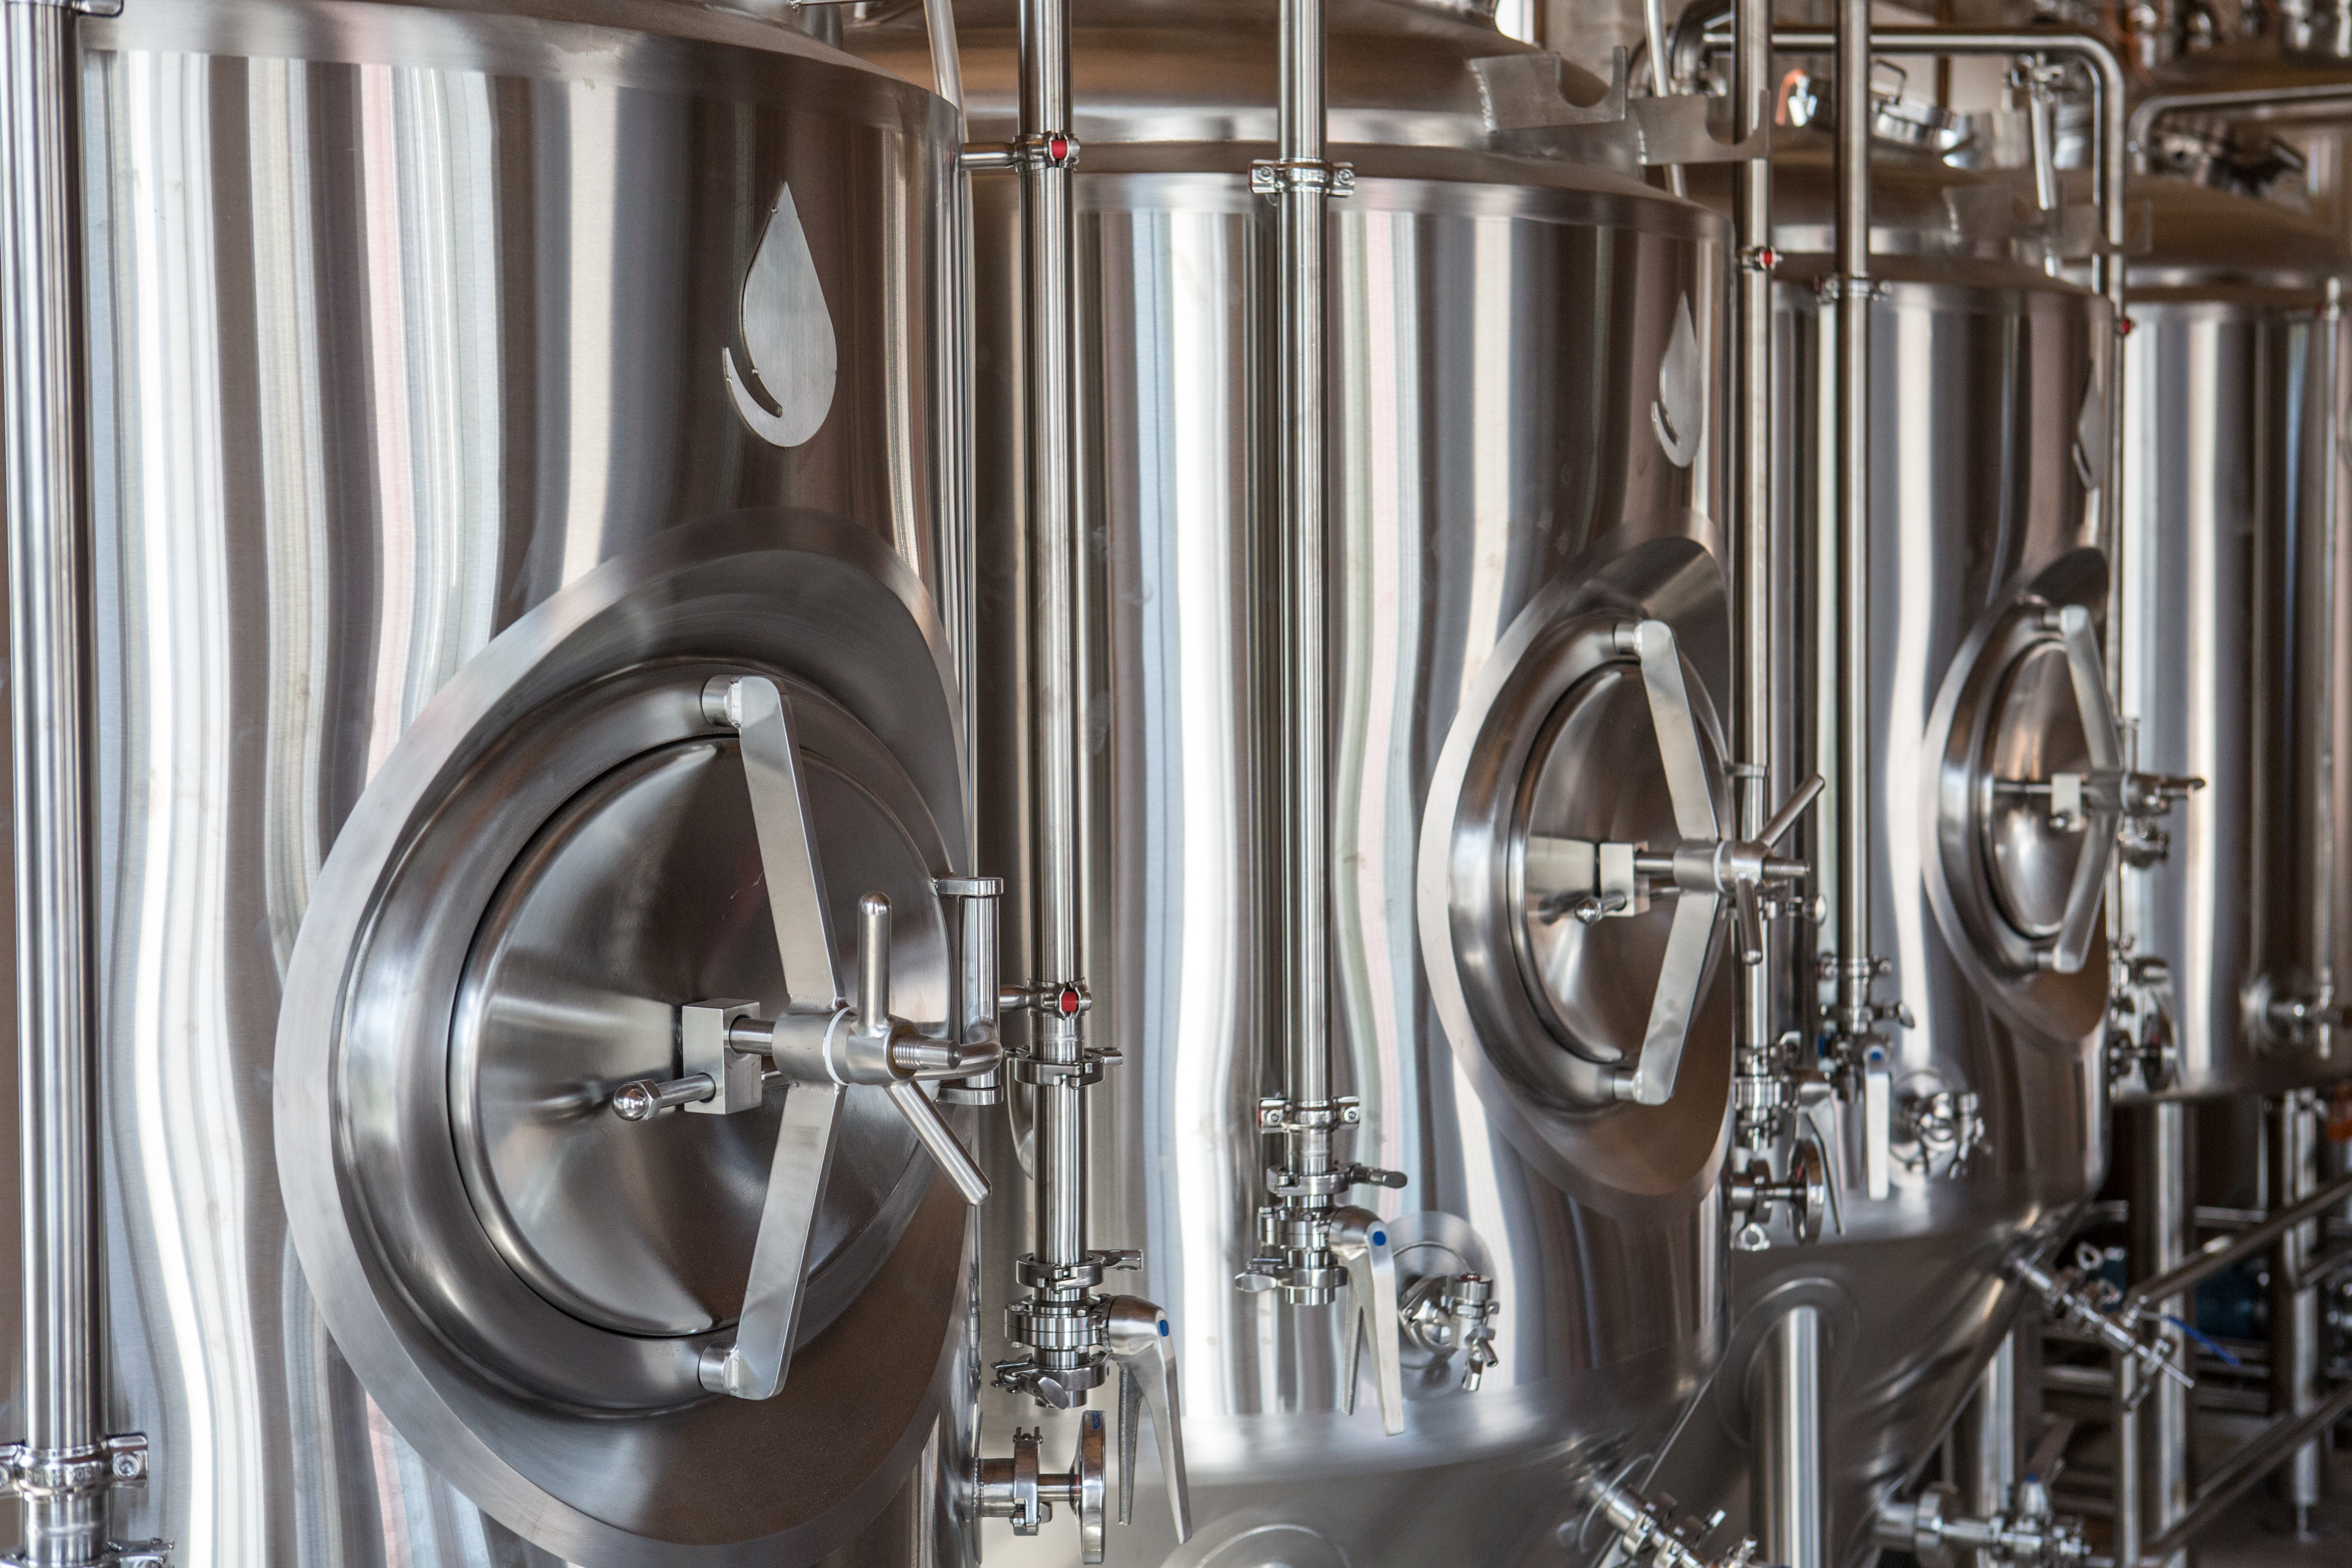 Gloucester Brewing Company Machines by Sara Harris Photography